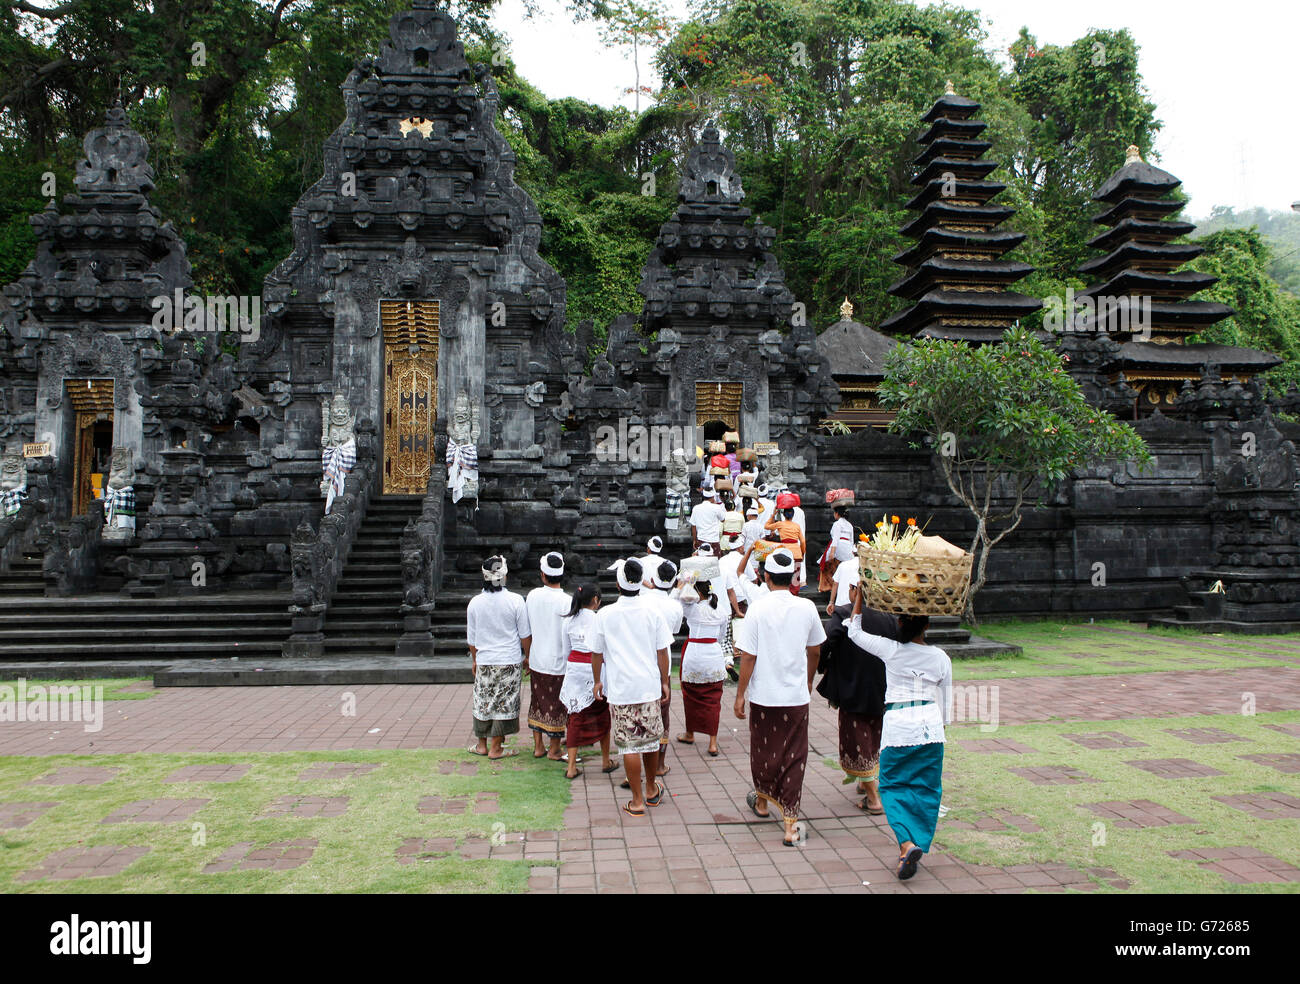 Religious ceremony at a temple in front of the bat cave, Goa Lawah, Bali, Indonesia, Southeast Asia, Asia Stock Photo